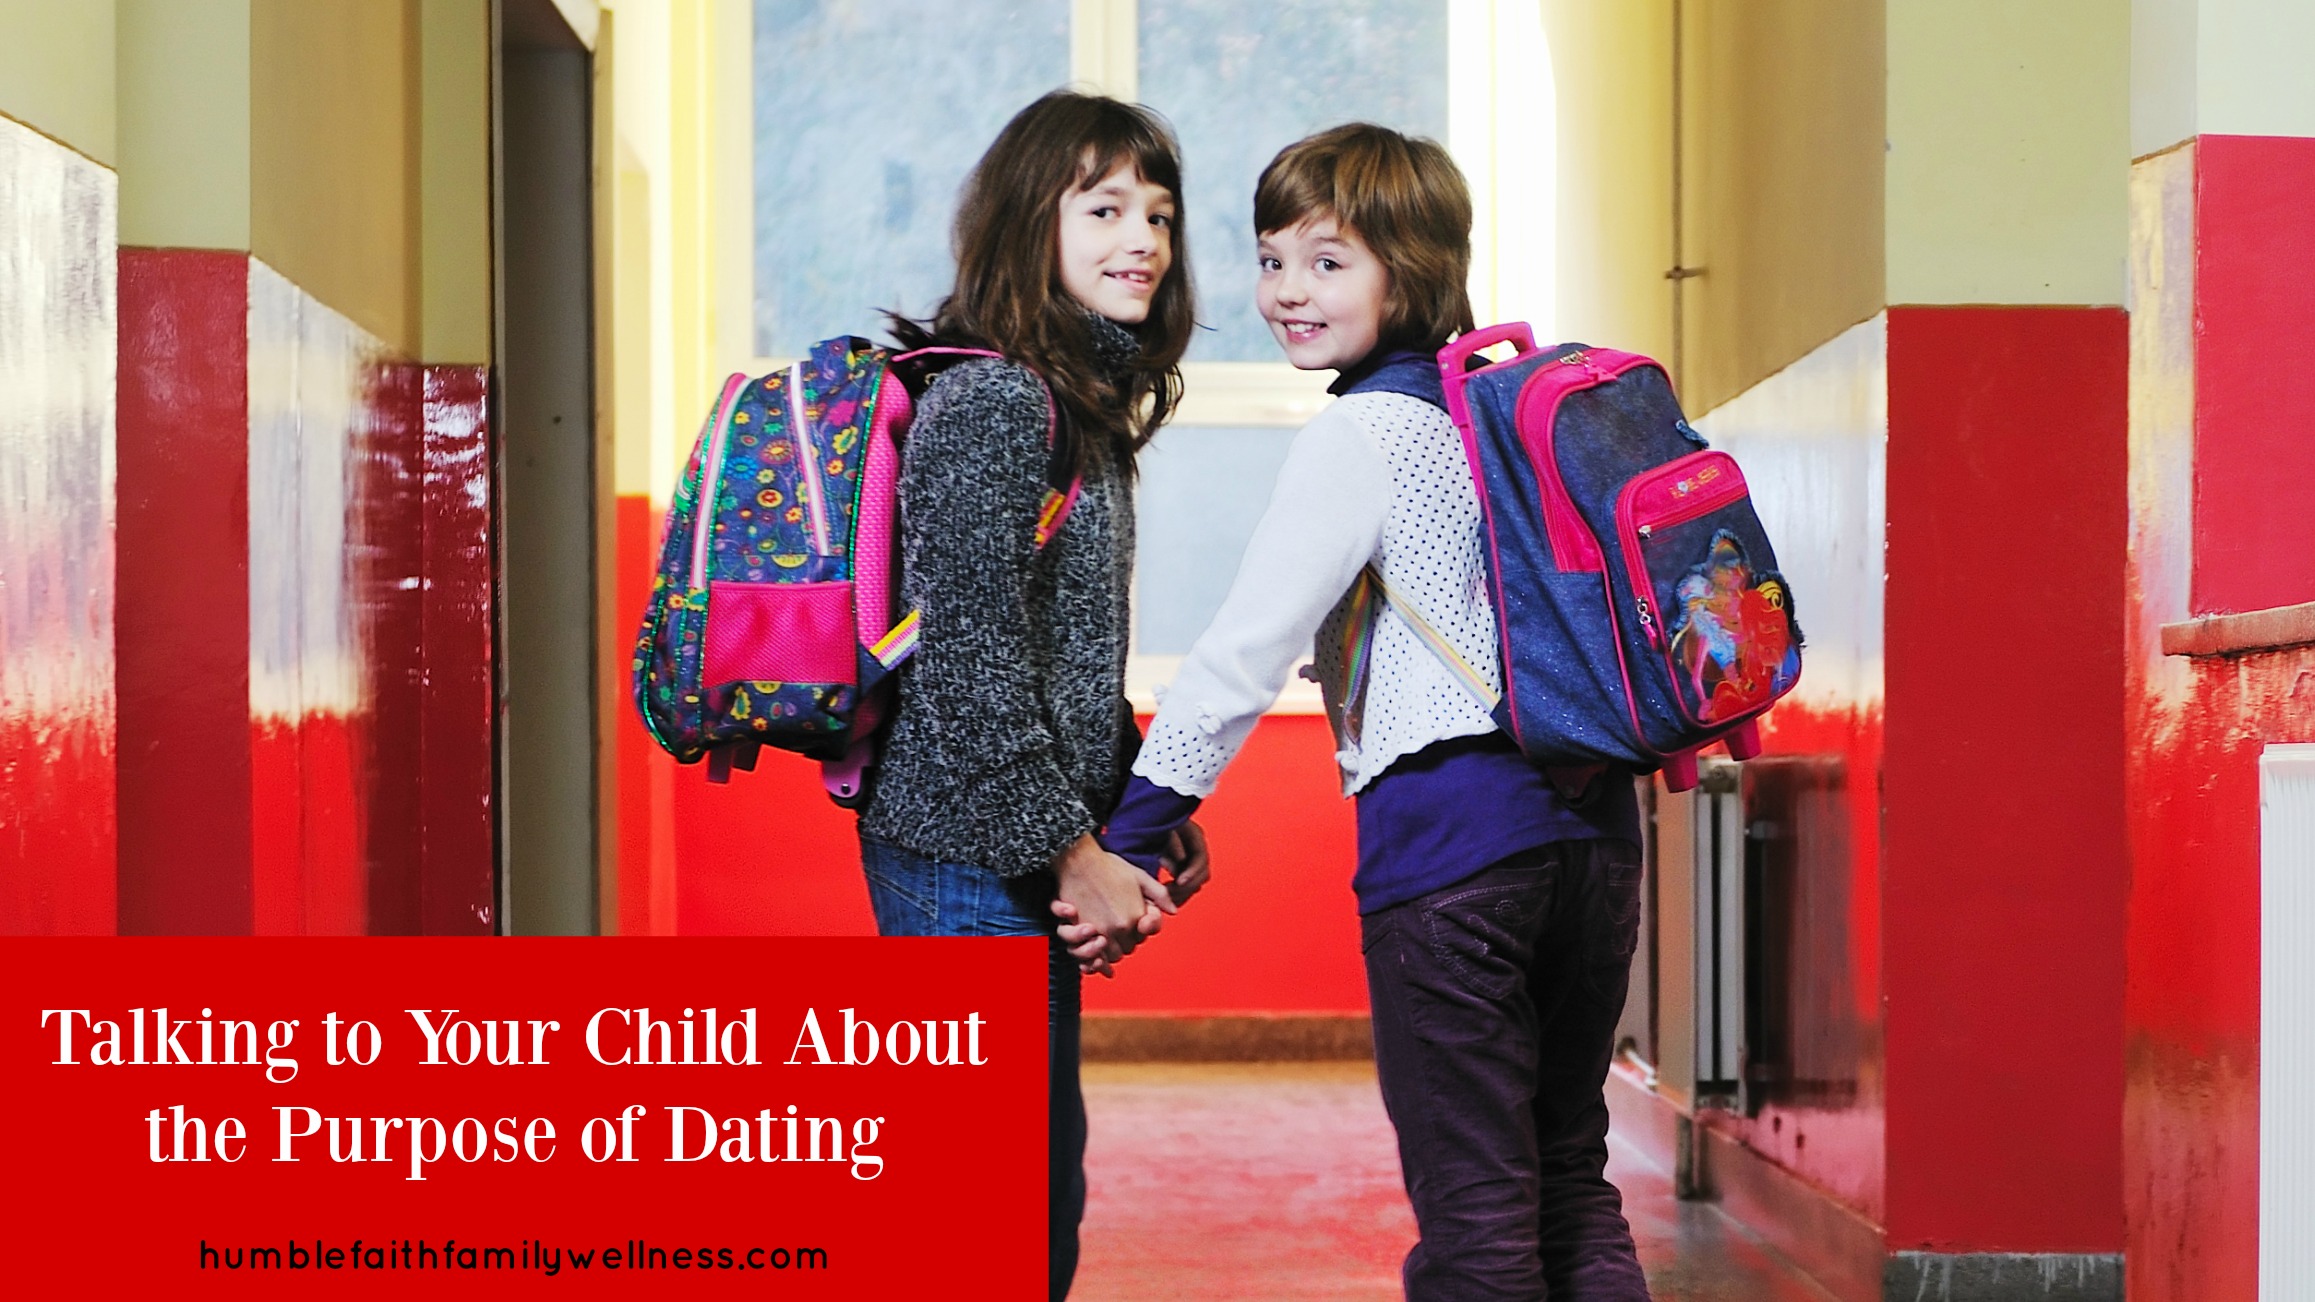 Talking to your child about the purpose of dating